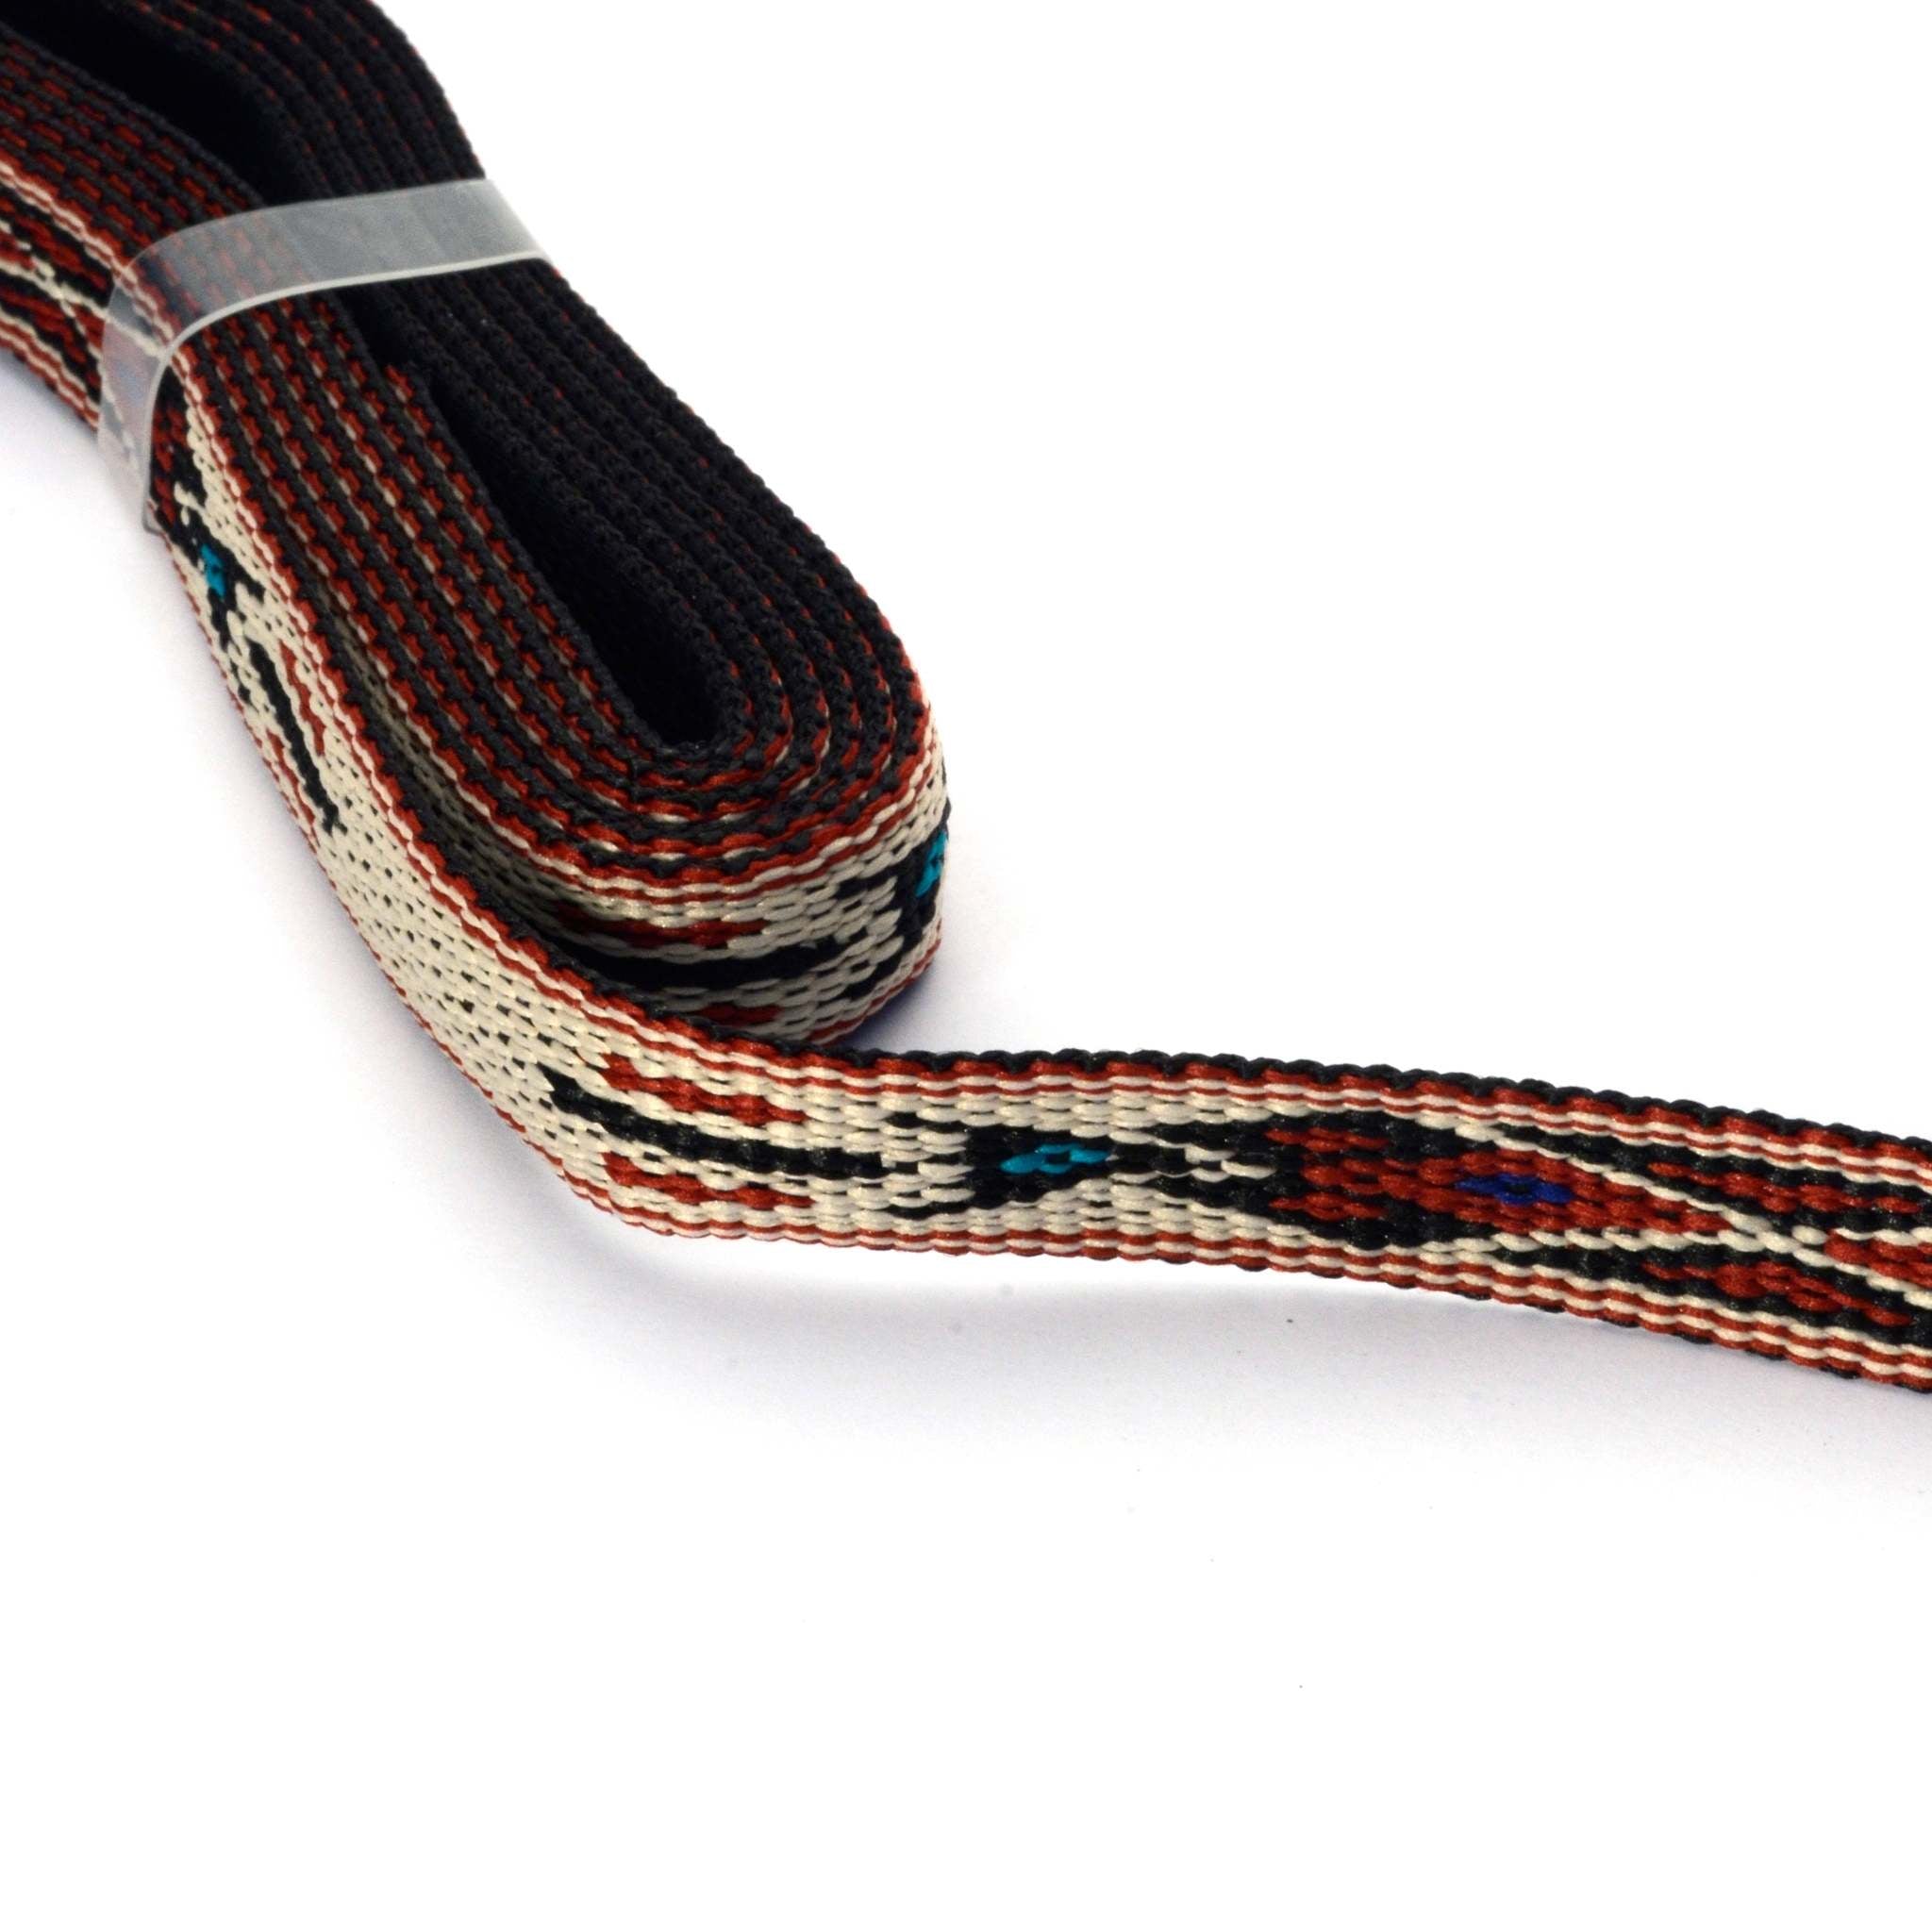 Decorative woven hitched style webbing with native american motif